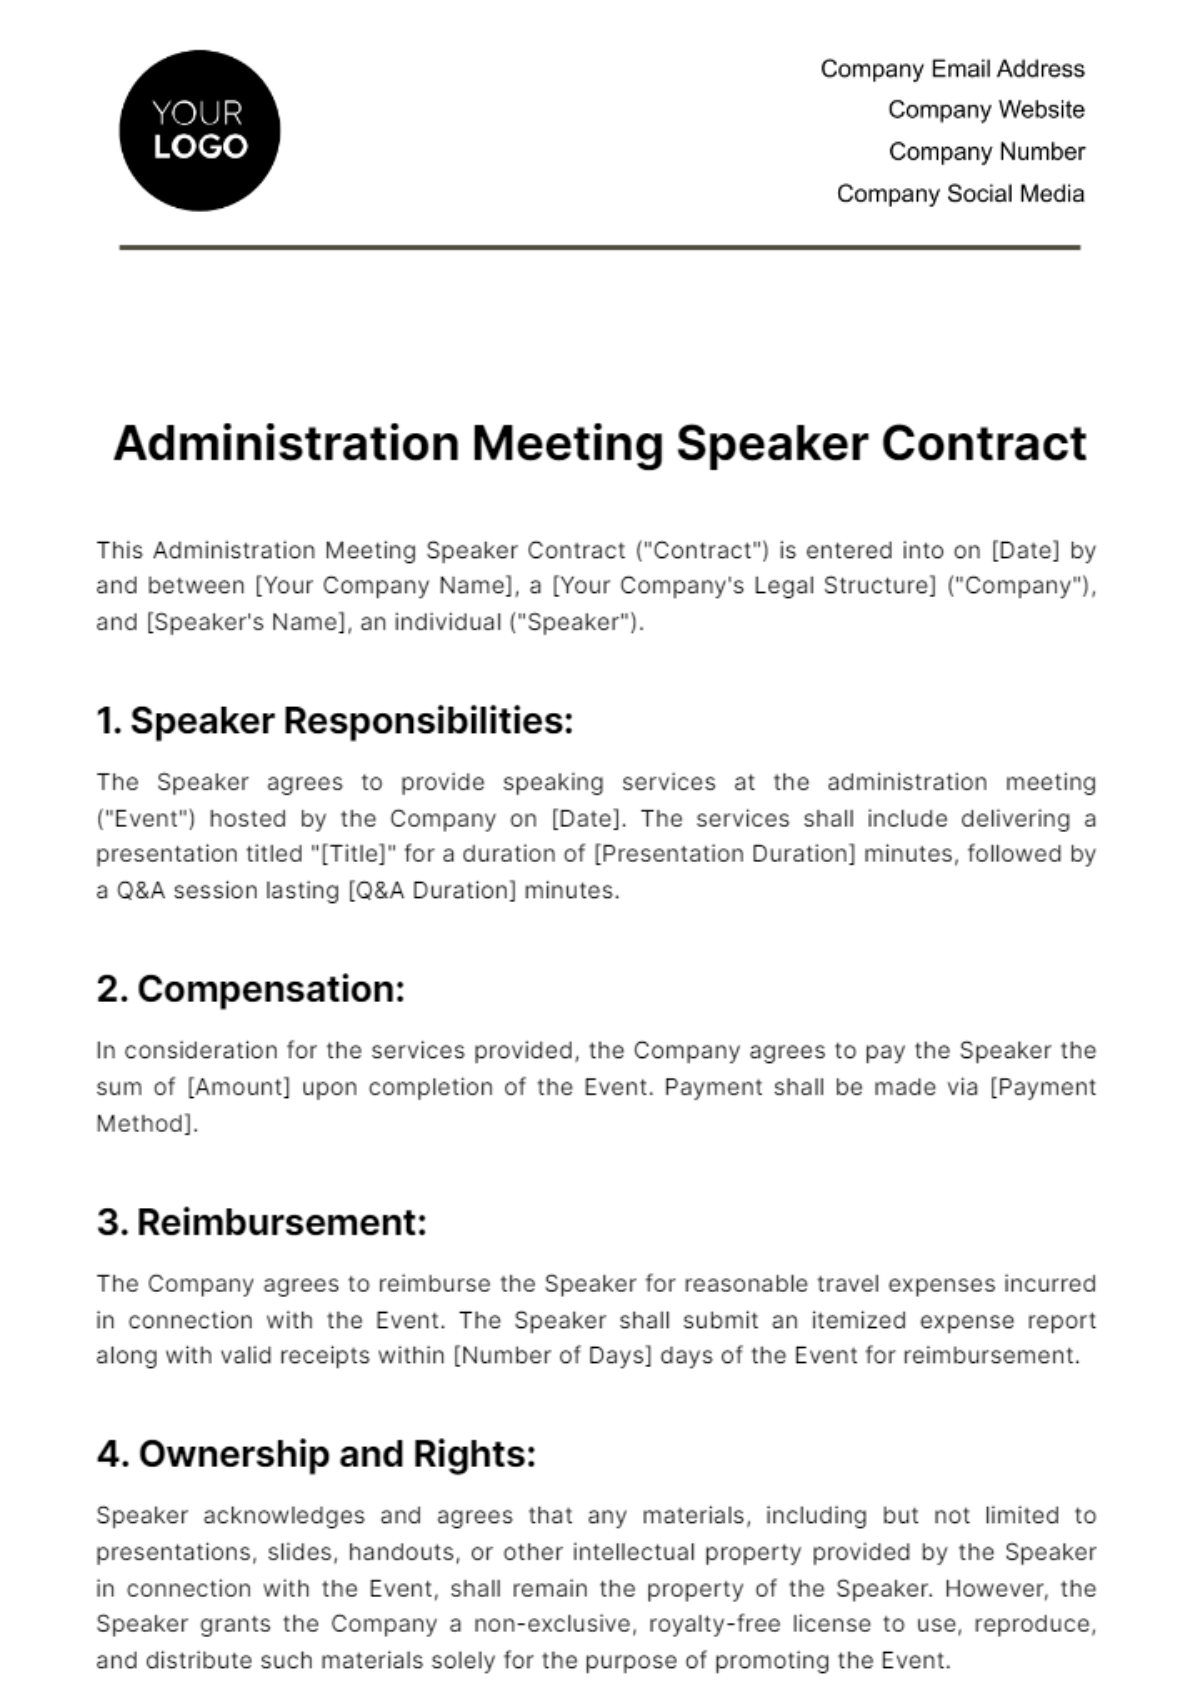 Free Administration Meeting Speaker Contract Template